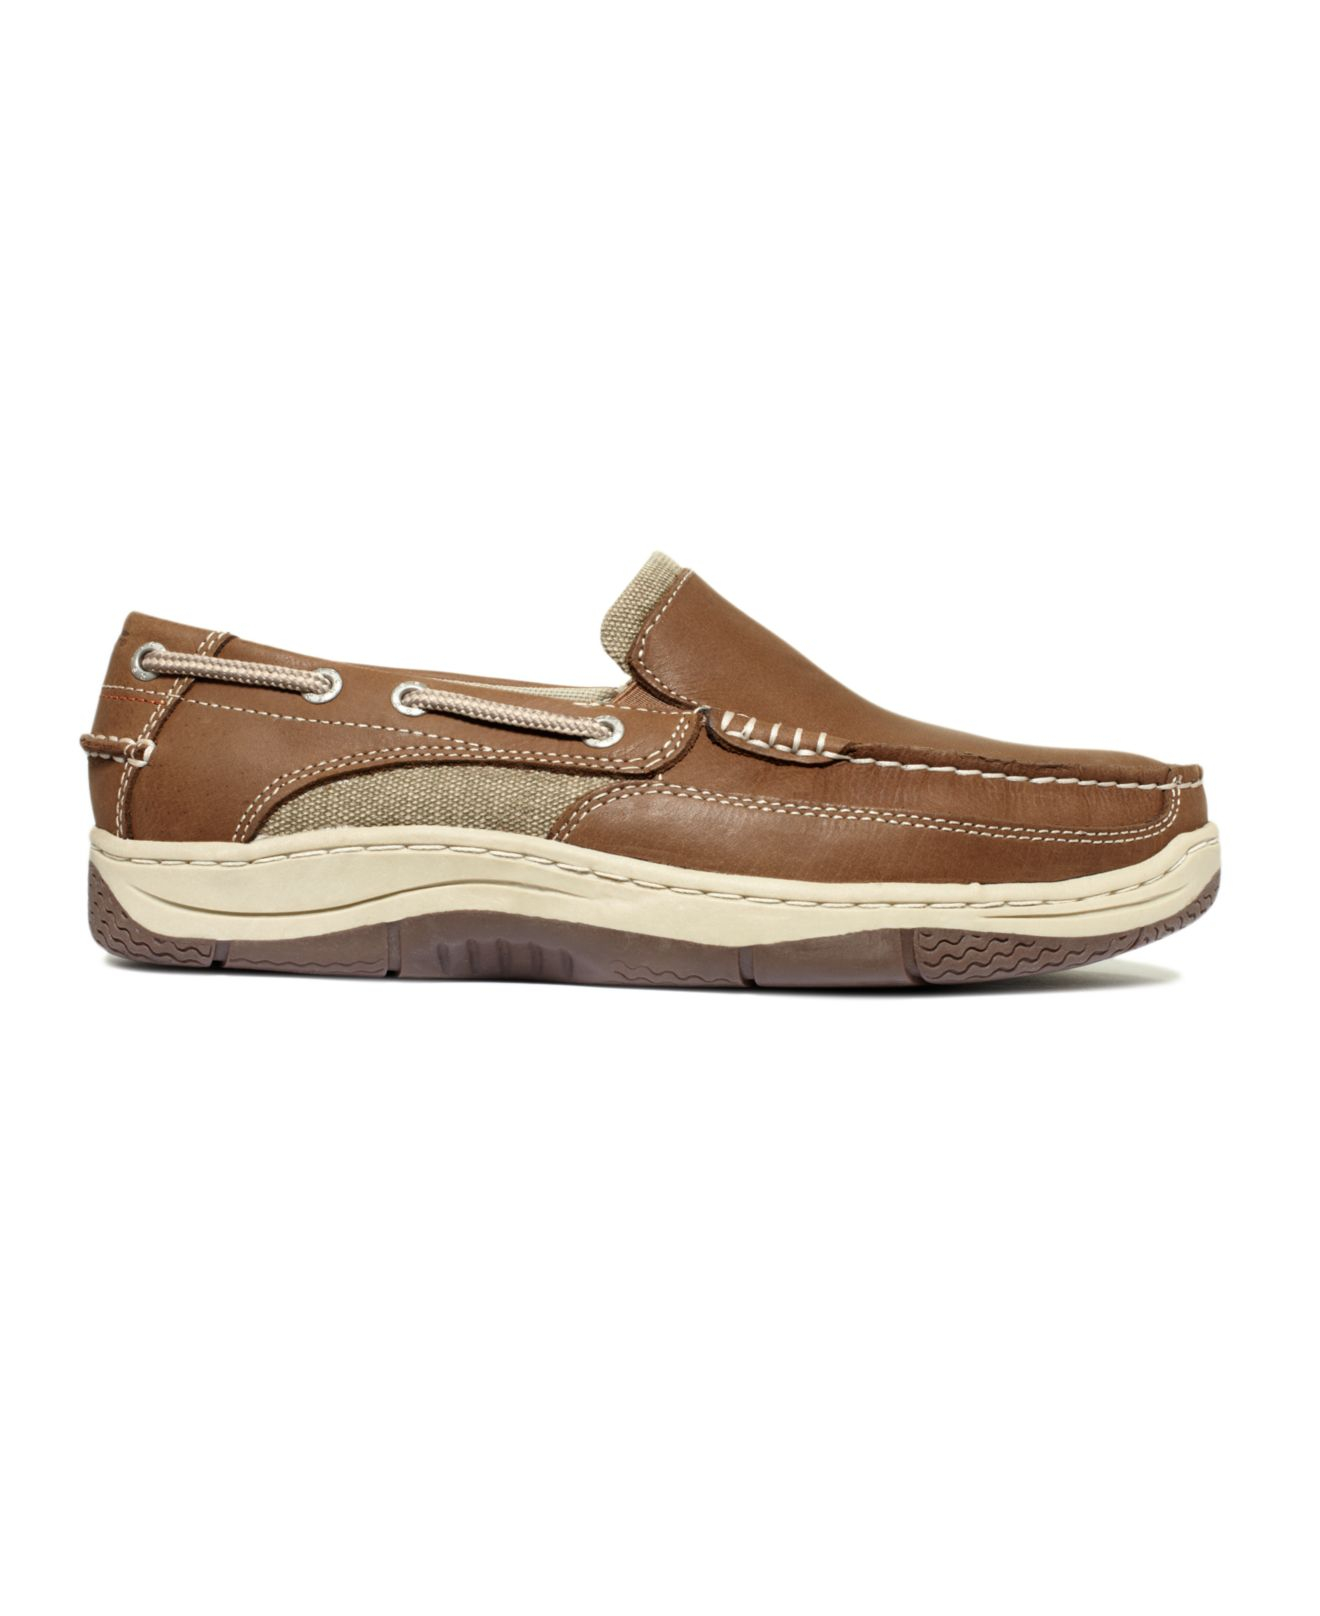 Dockers Leather Marlow Slip-on Boat Shoes in Tan (Brown) for Men - Lyst